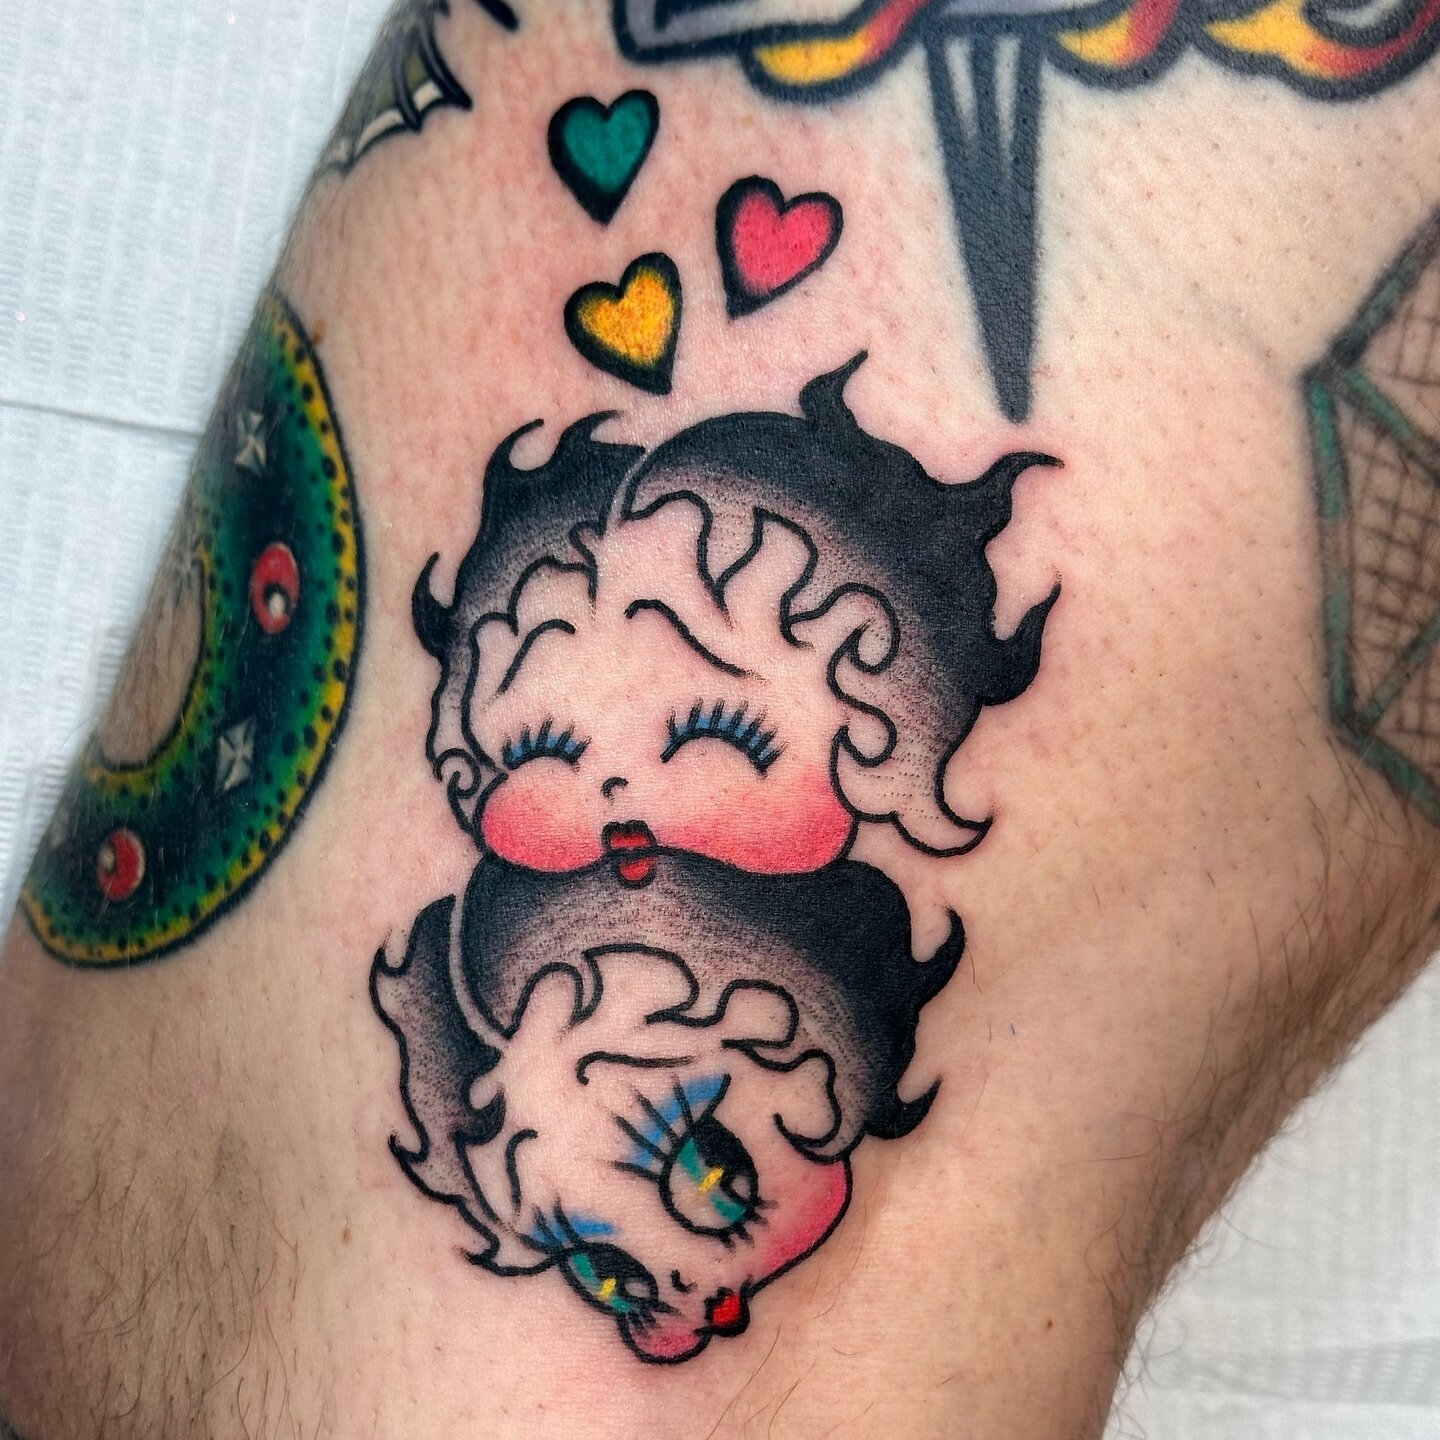 Boops! By @gracie_tat2 🩵💛🩷 Shoot her an email at graciedidmytat2@gmail.com if you&rsquo;d like to set something up